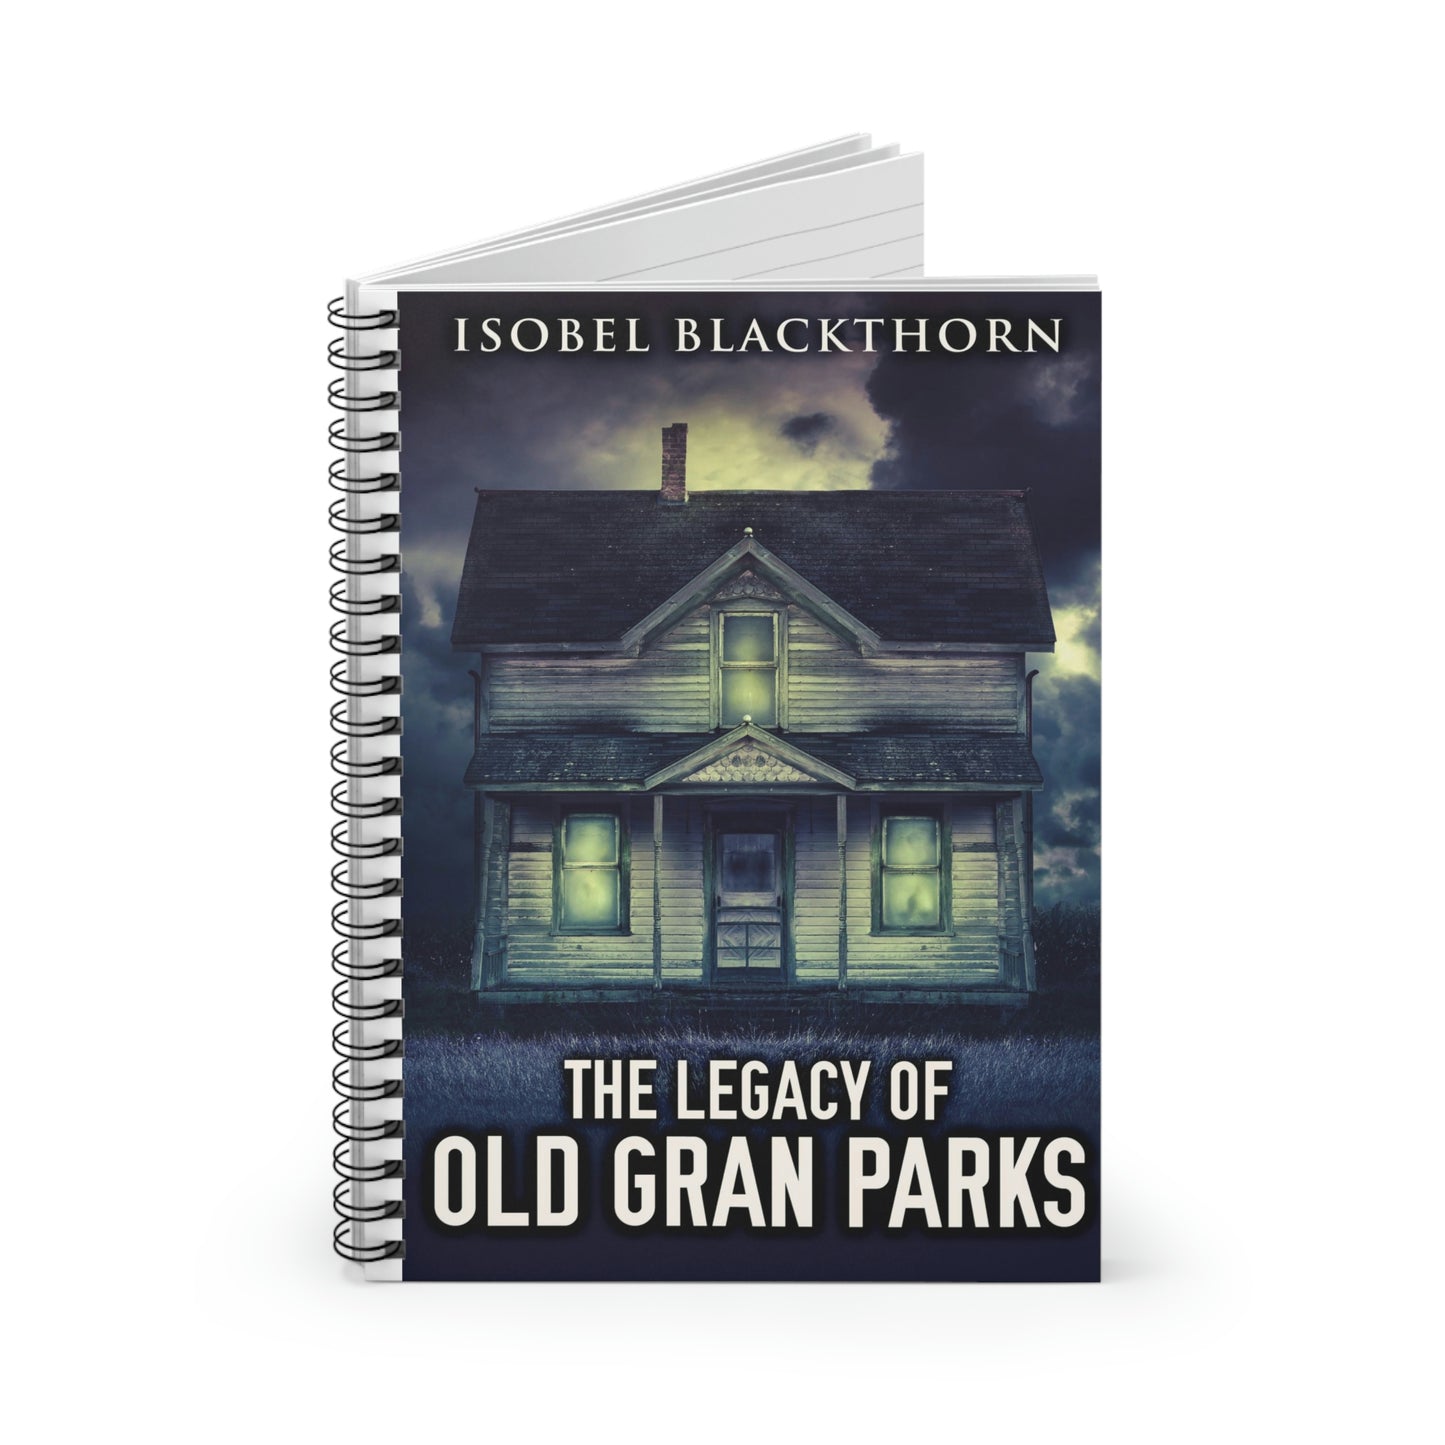 The Legacy Of Old Gran Parks - Spiral Notebook